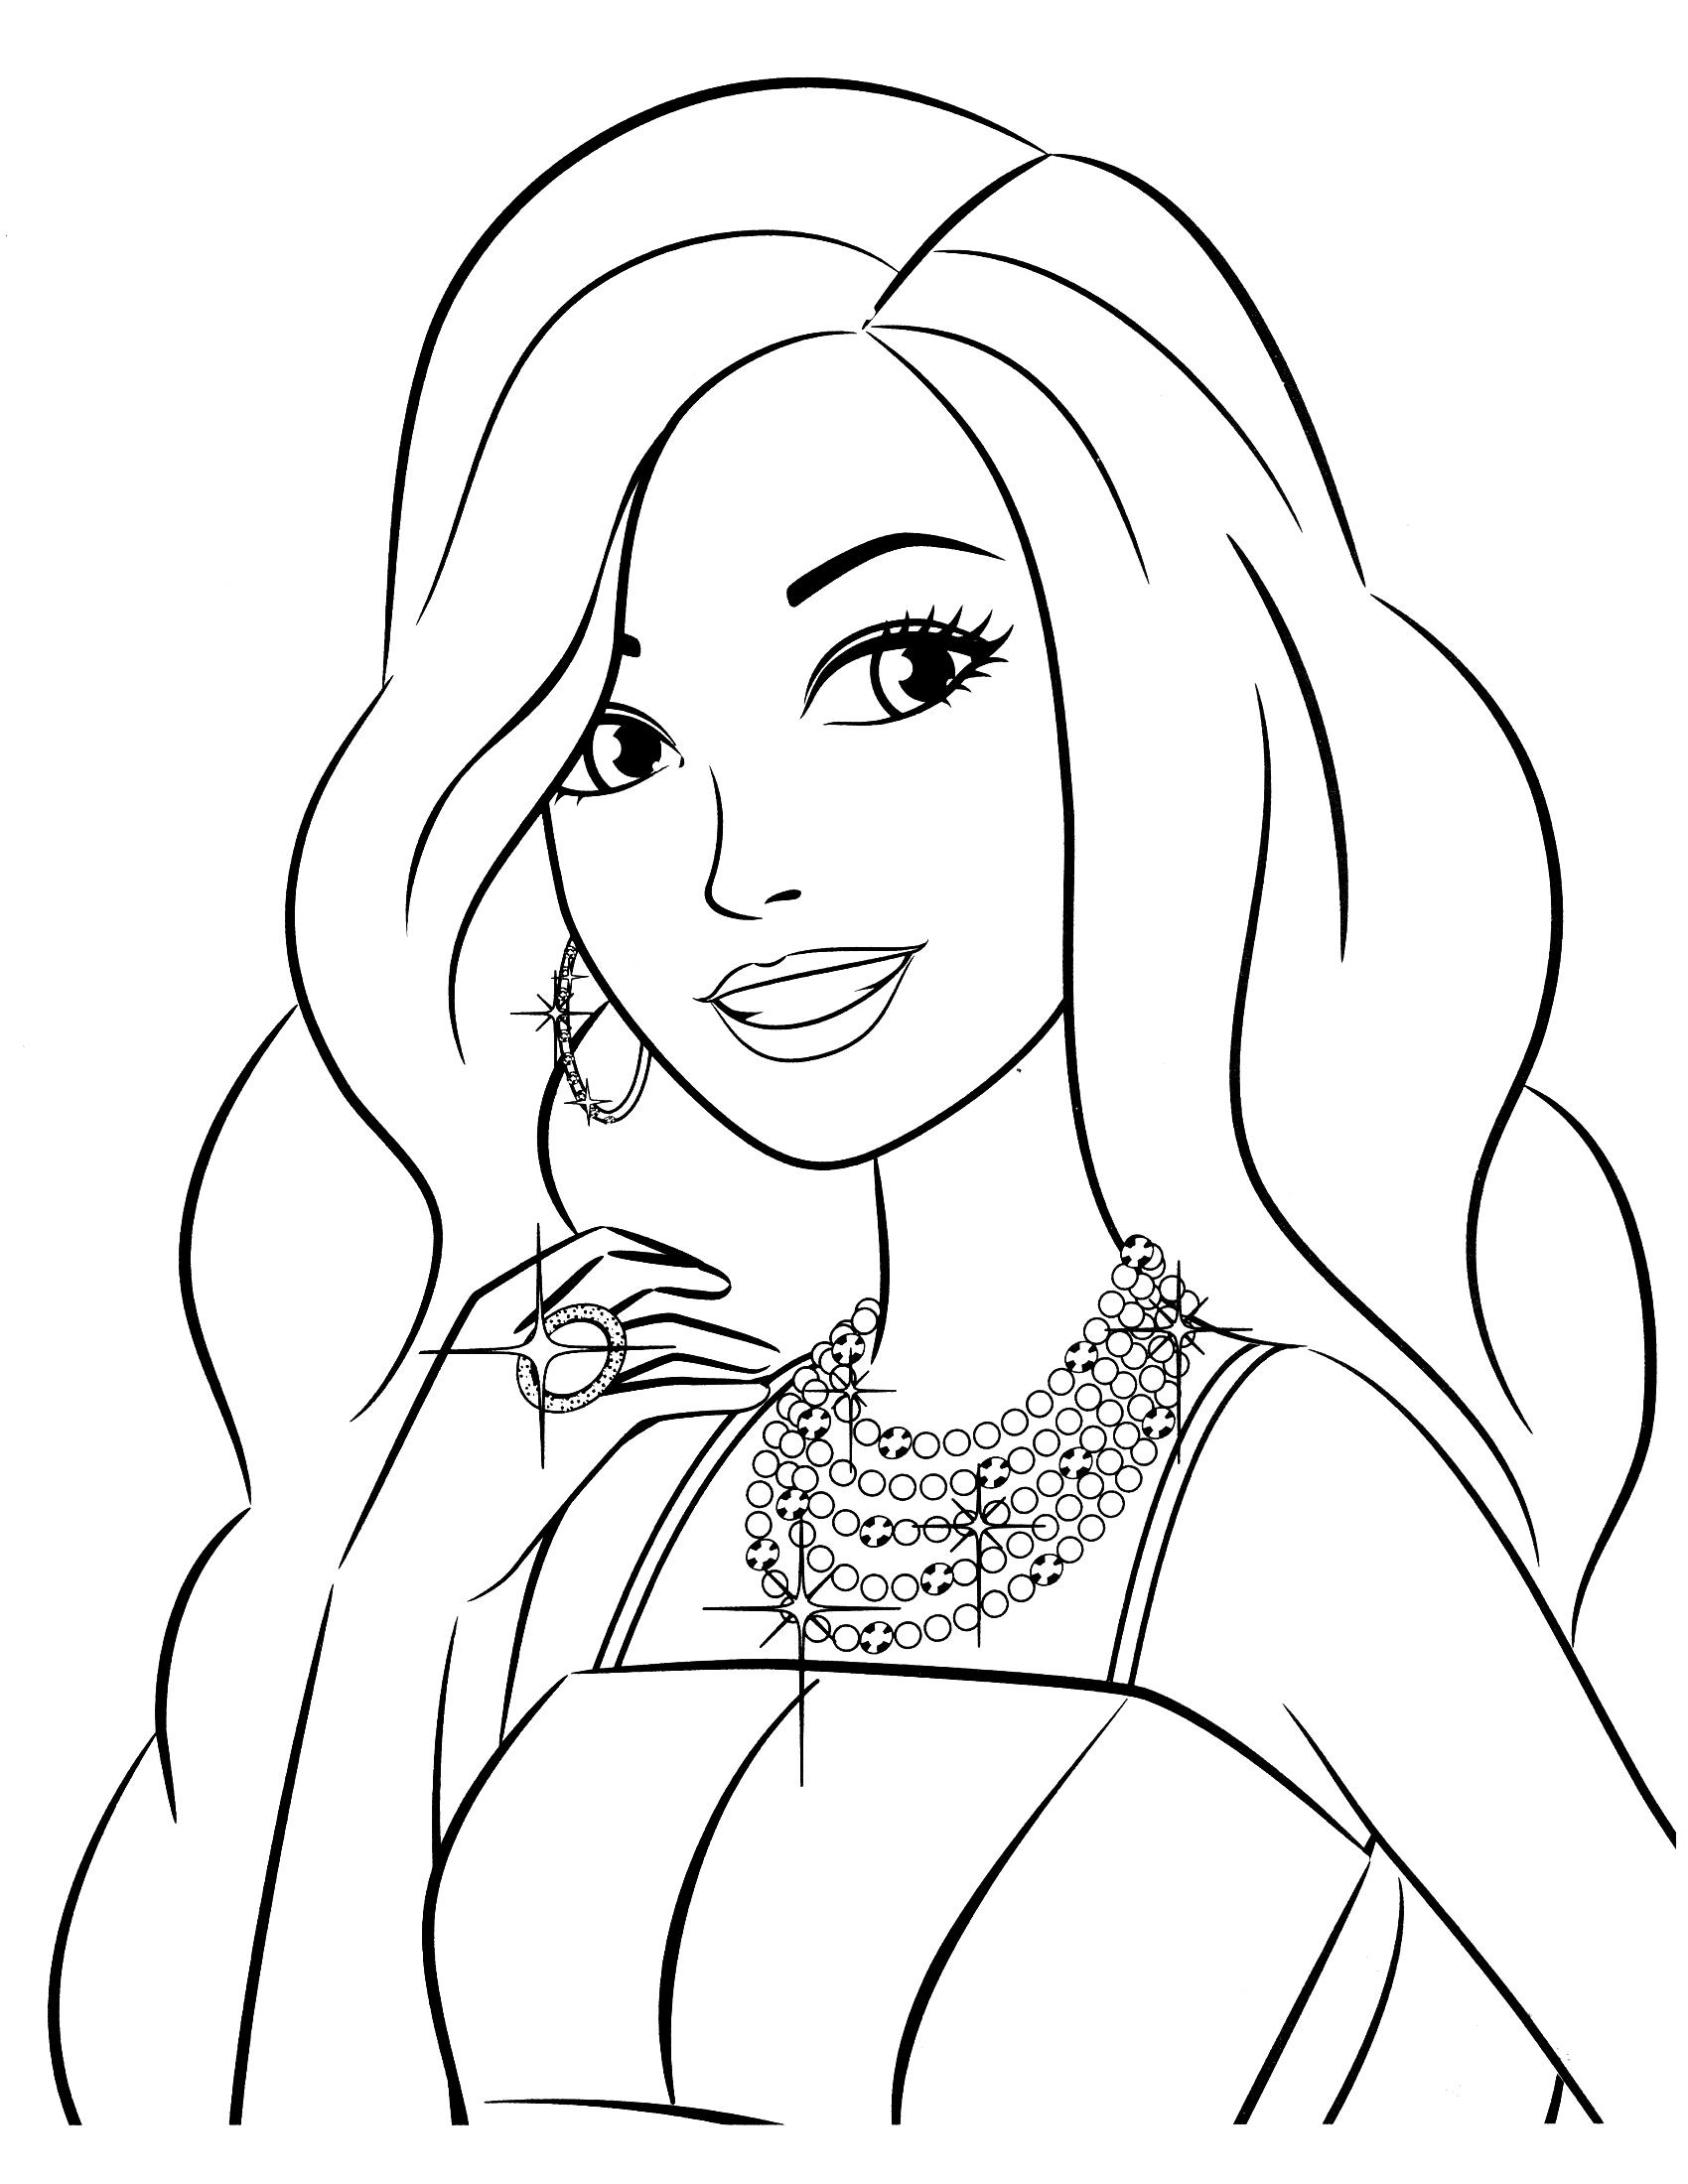 Barbie clipart drawing, Barbie drawing Transparent FREE for